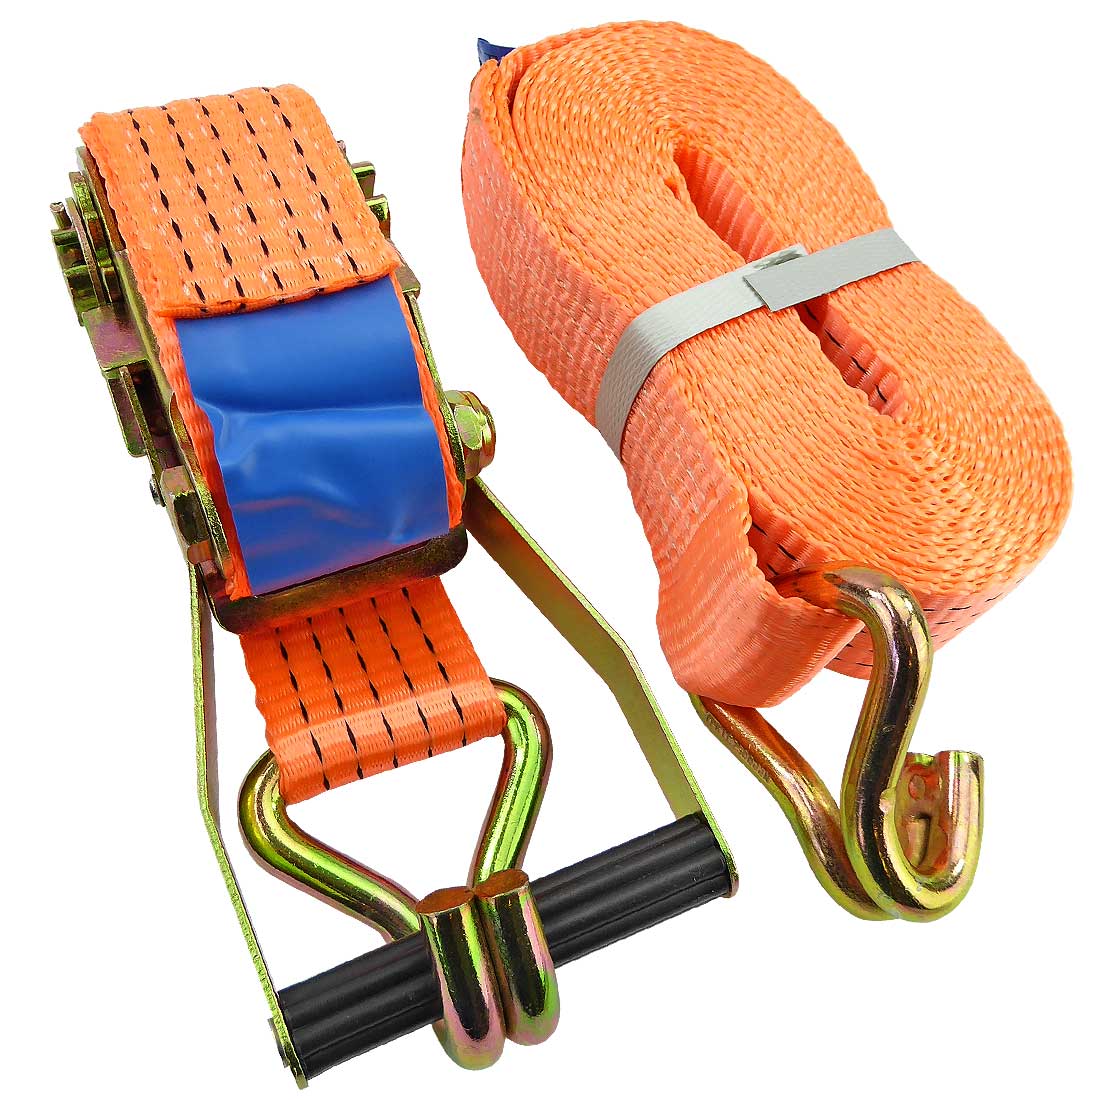 Heavy Duty 5000kg Ratchet Straps with Claw Hooks